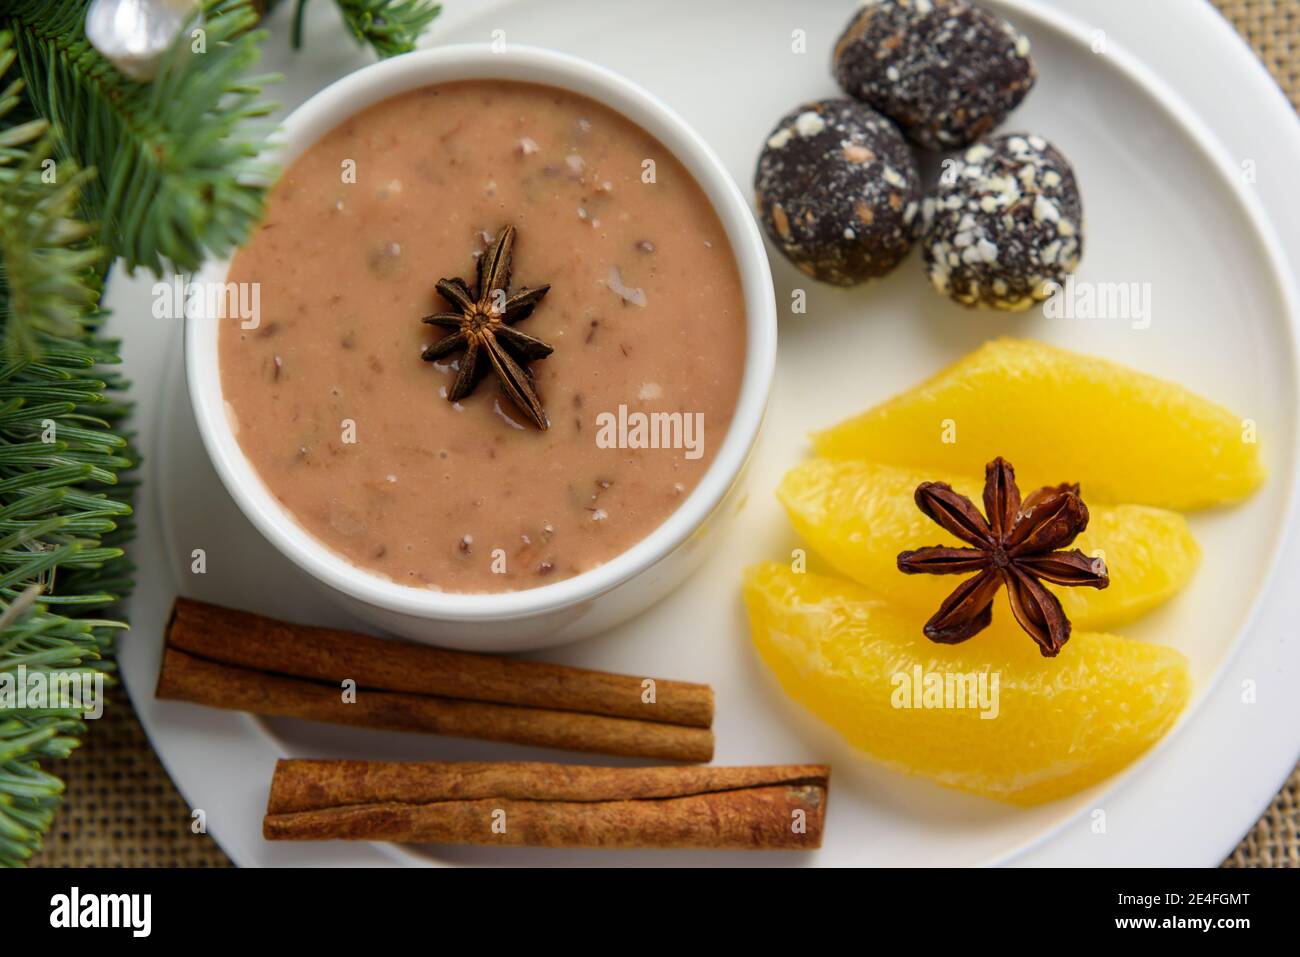 Plum pudding with a hint of orange with spicy date truffles, close-up Stock Photo